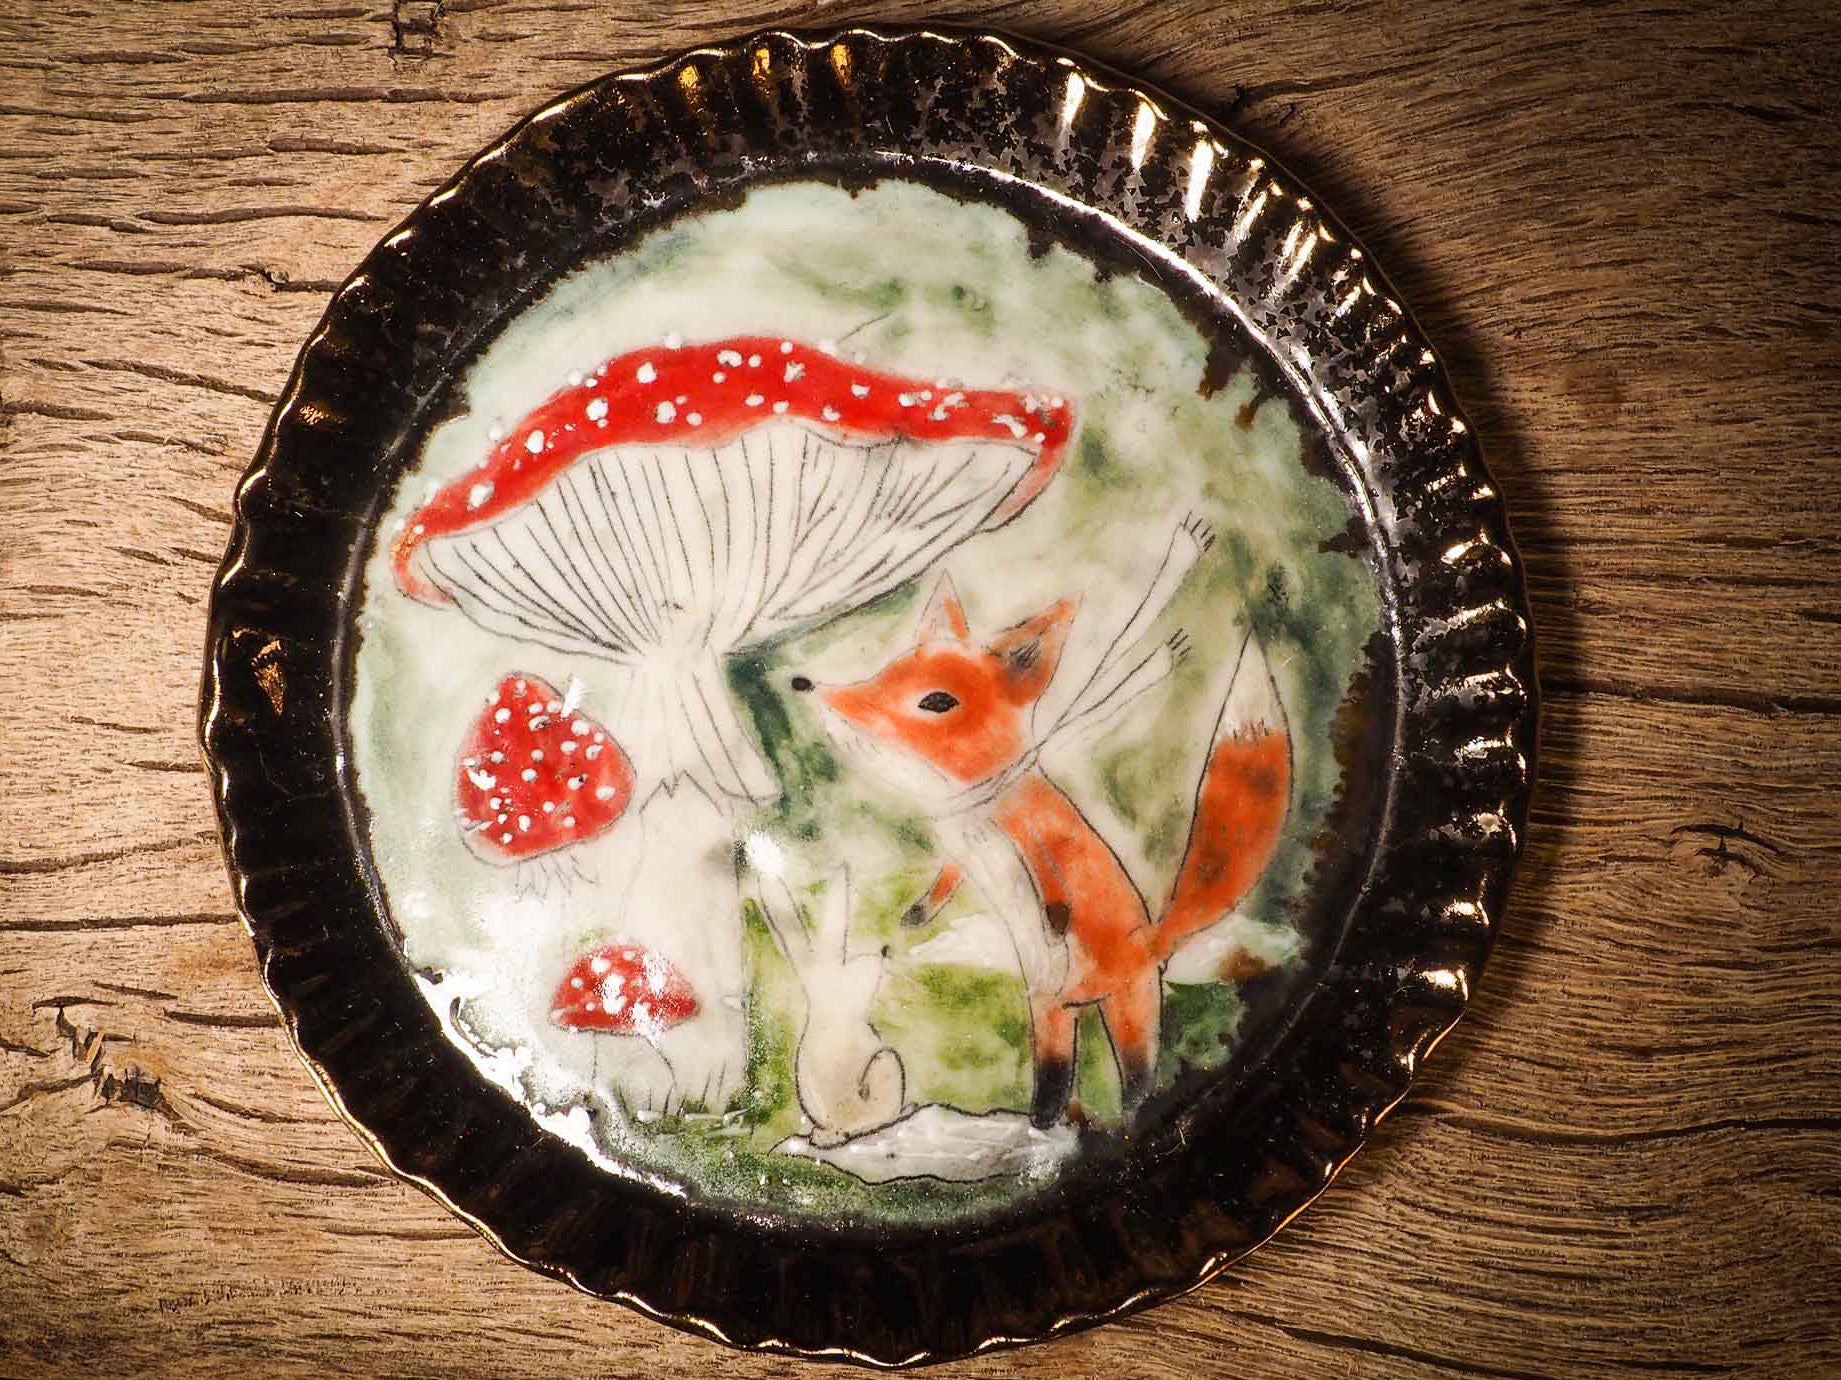 An original Christmas fire glazed ceramic handmade piece by Idania Salcido, the artist behind Danita Art. Glazed, carved sgraffito stoneware, hand painted and decorated, it is illustrated by hand with snowmen, Christmas trees, Santa Claus, angels and snow balls and winter themes.